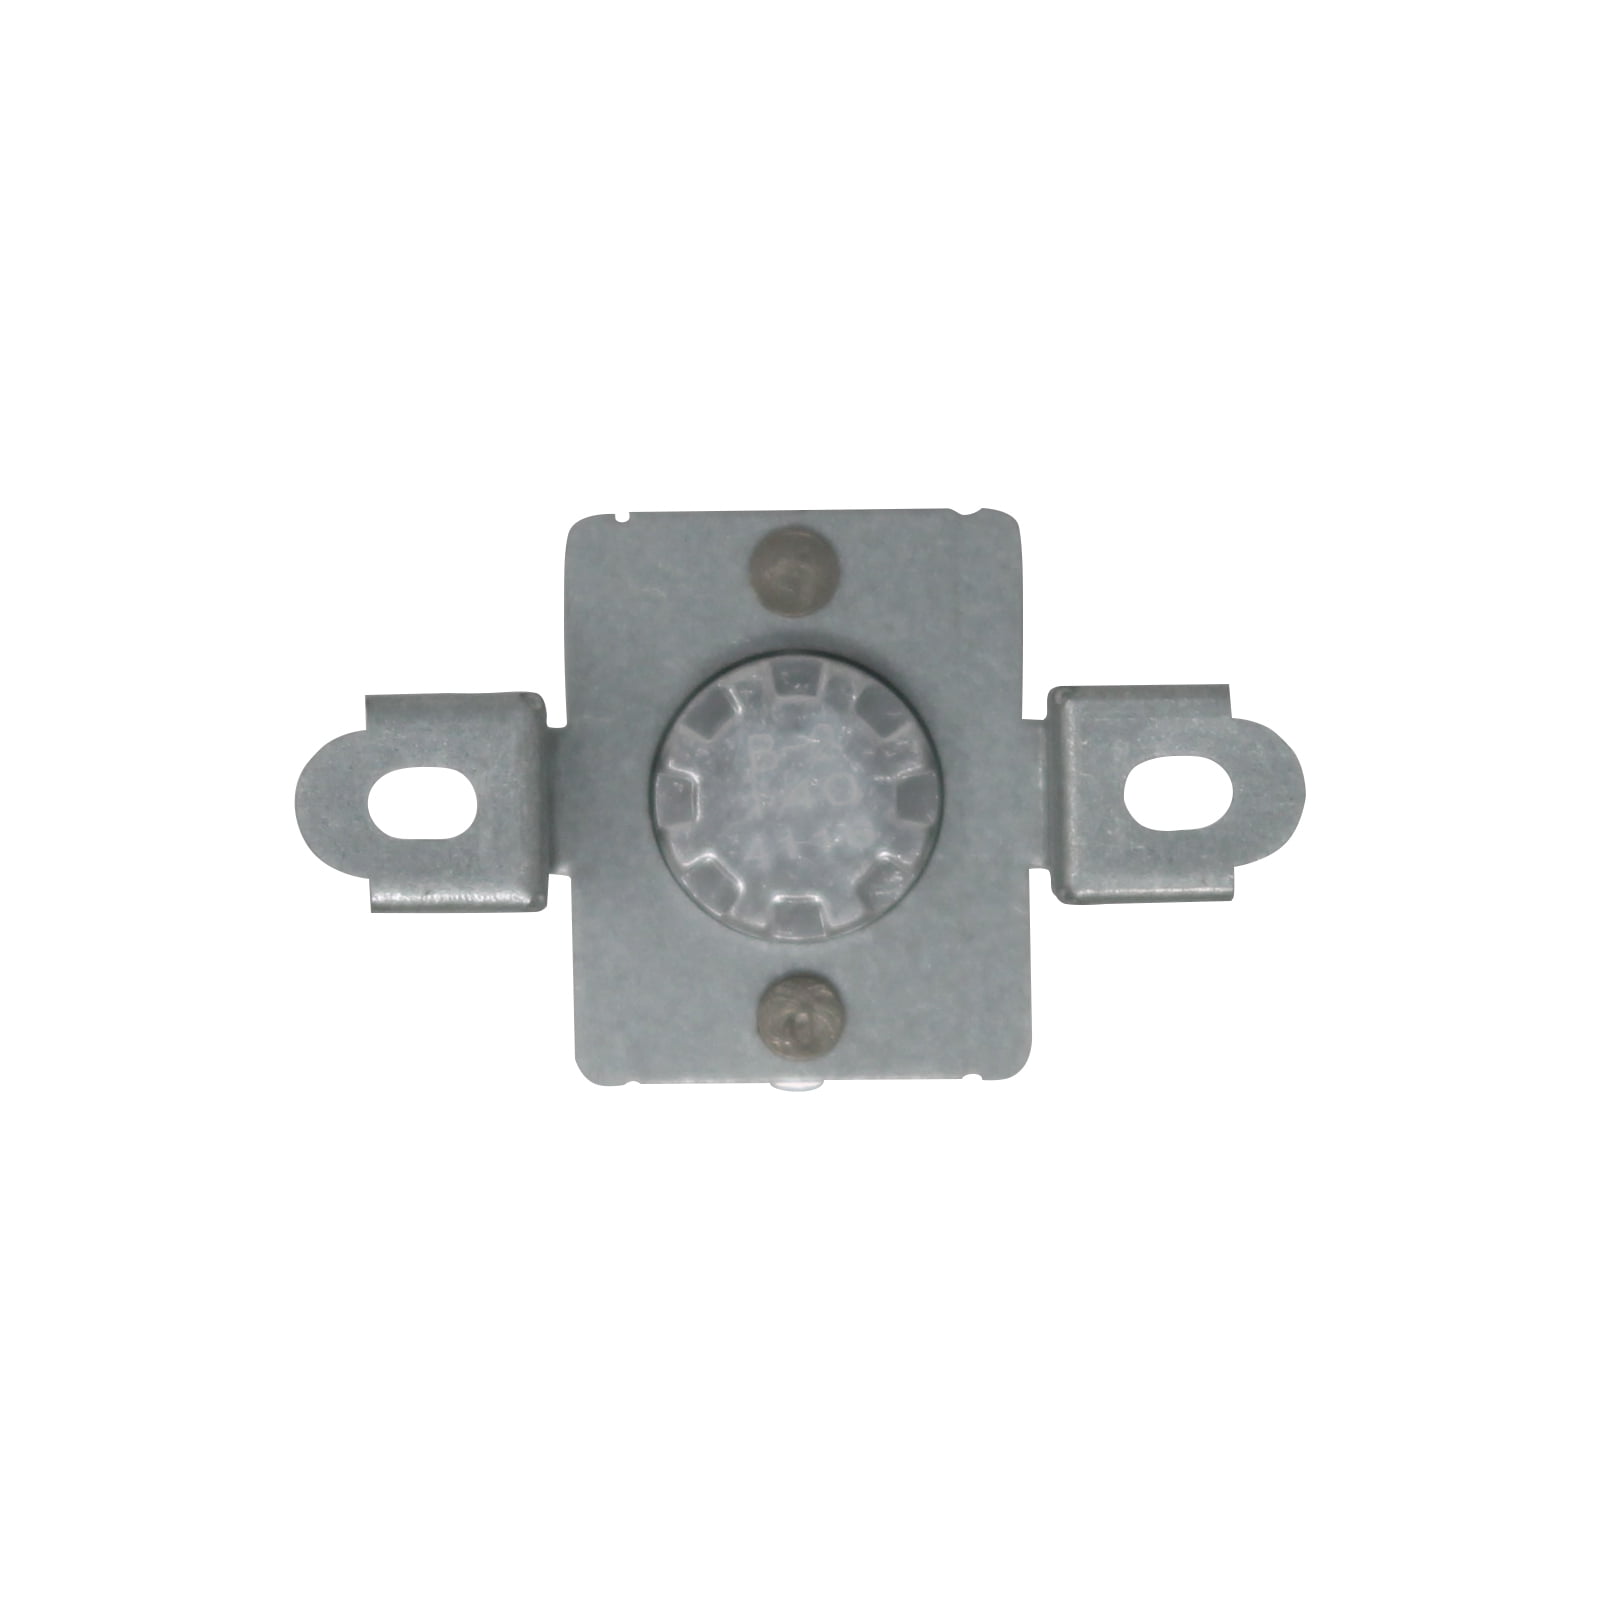 Replacement 6931EL3003D Dryer Thermal Fuse for Kenmore, LG Dryers